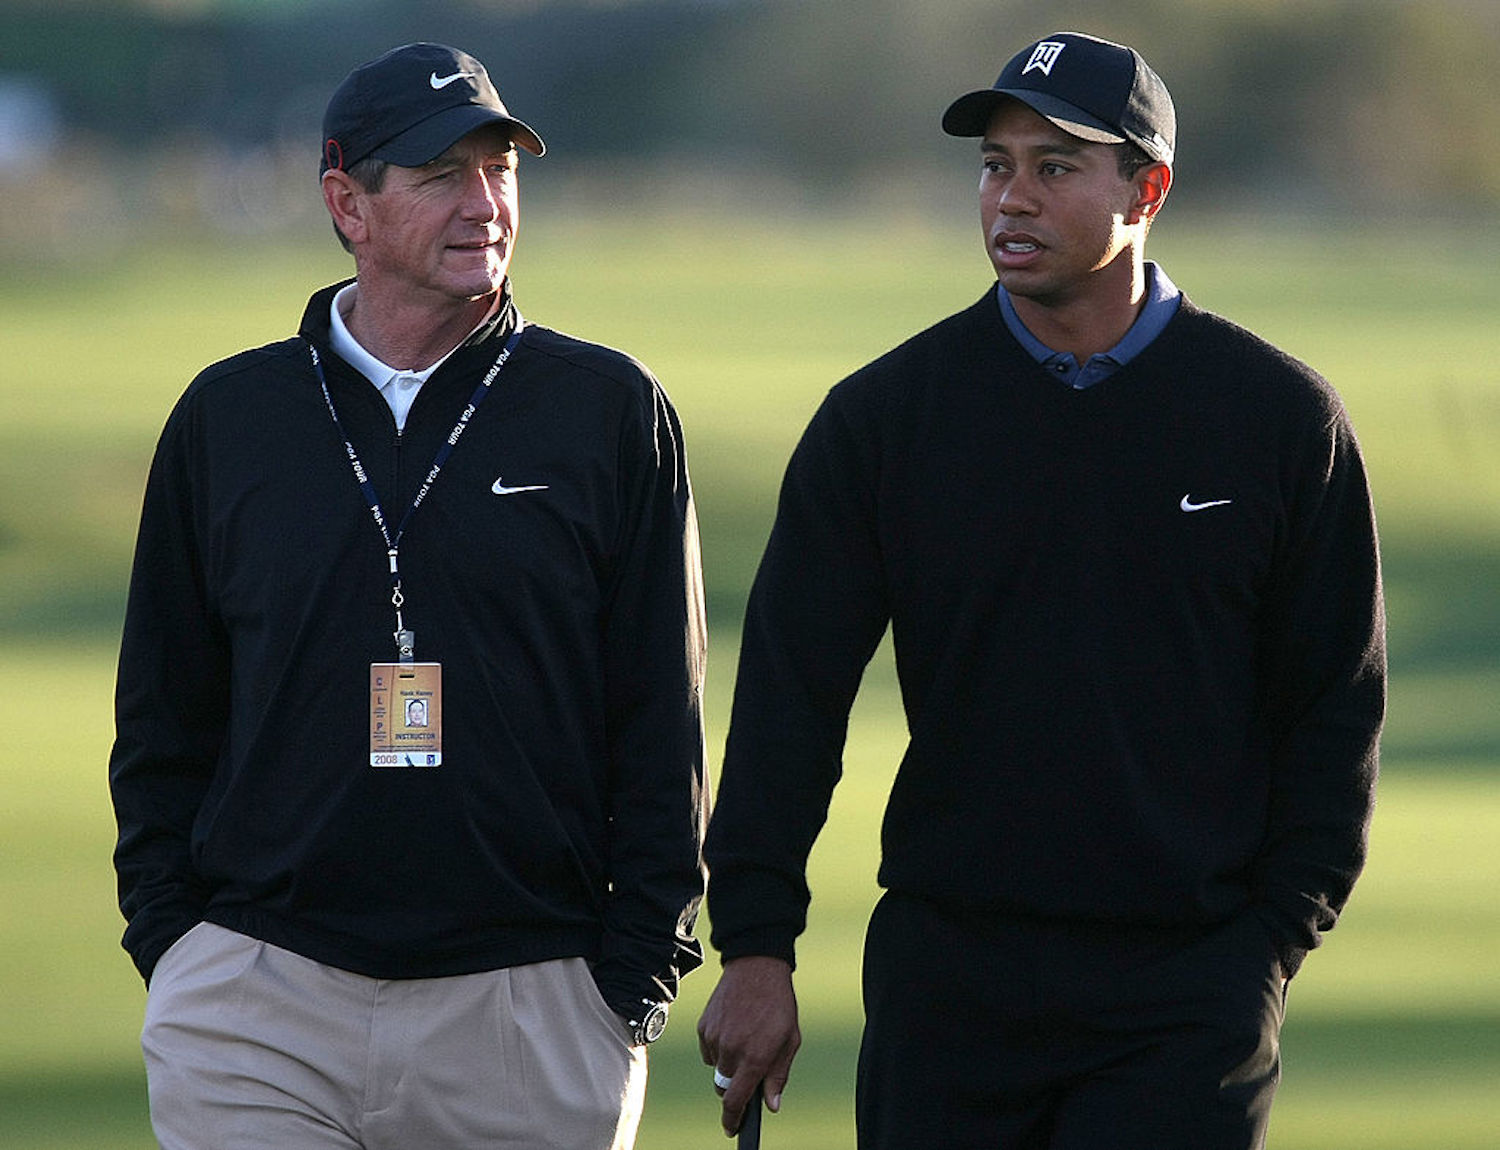 Tiger Woods flew pretty under the radar heading into the 2020 PGA Championship, but his former coach believes he's the one to beat.